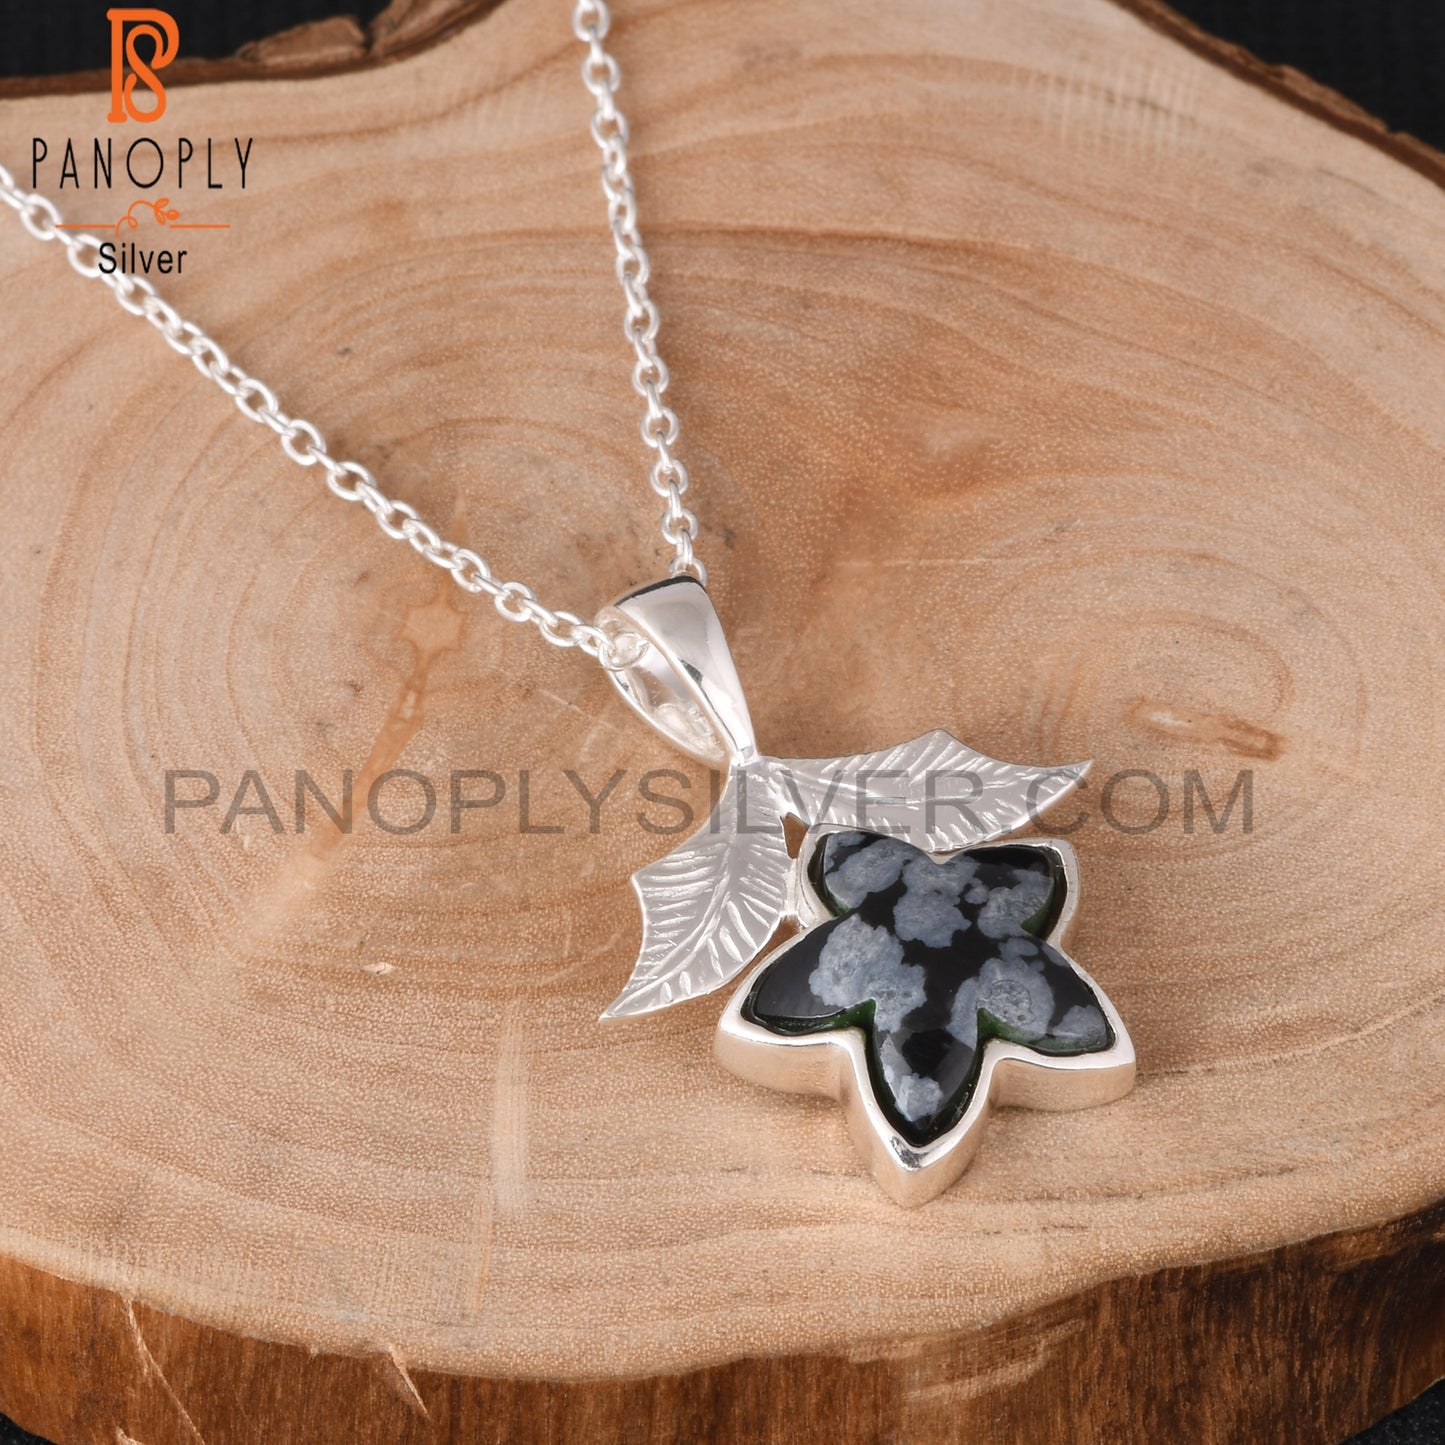 Snowflake Obsidian Moonflower 925 Silver Pendant With Chain